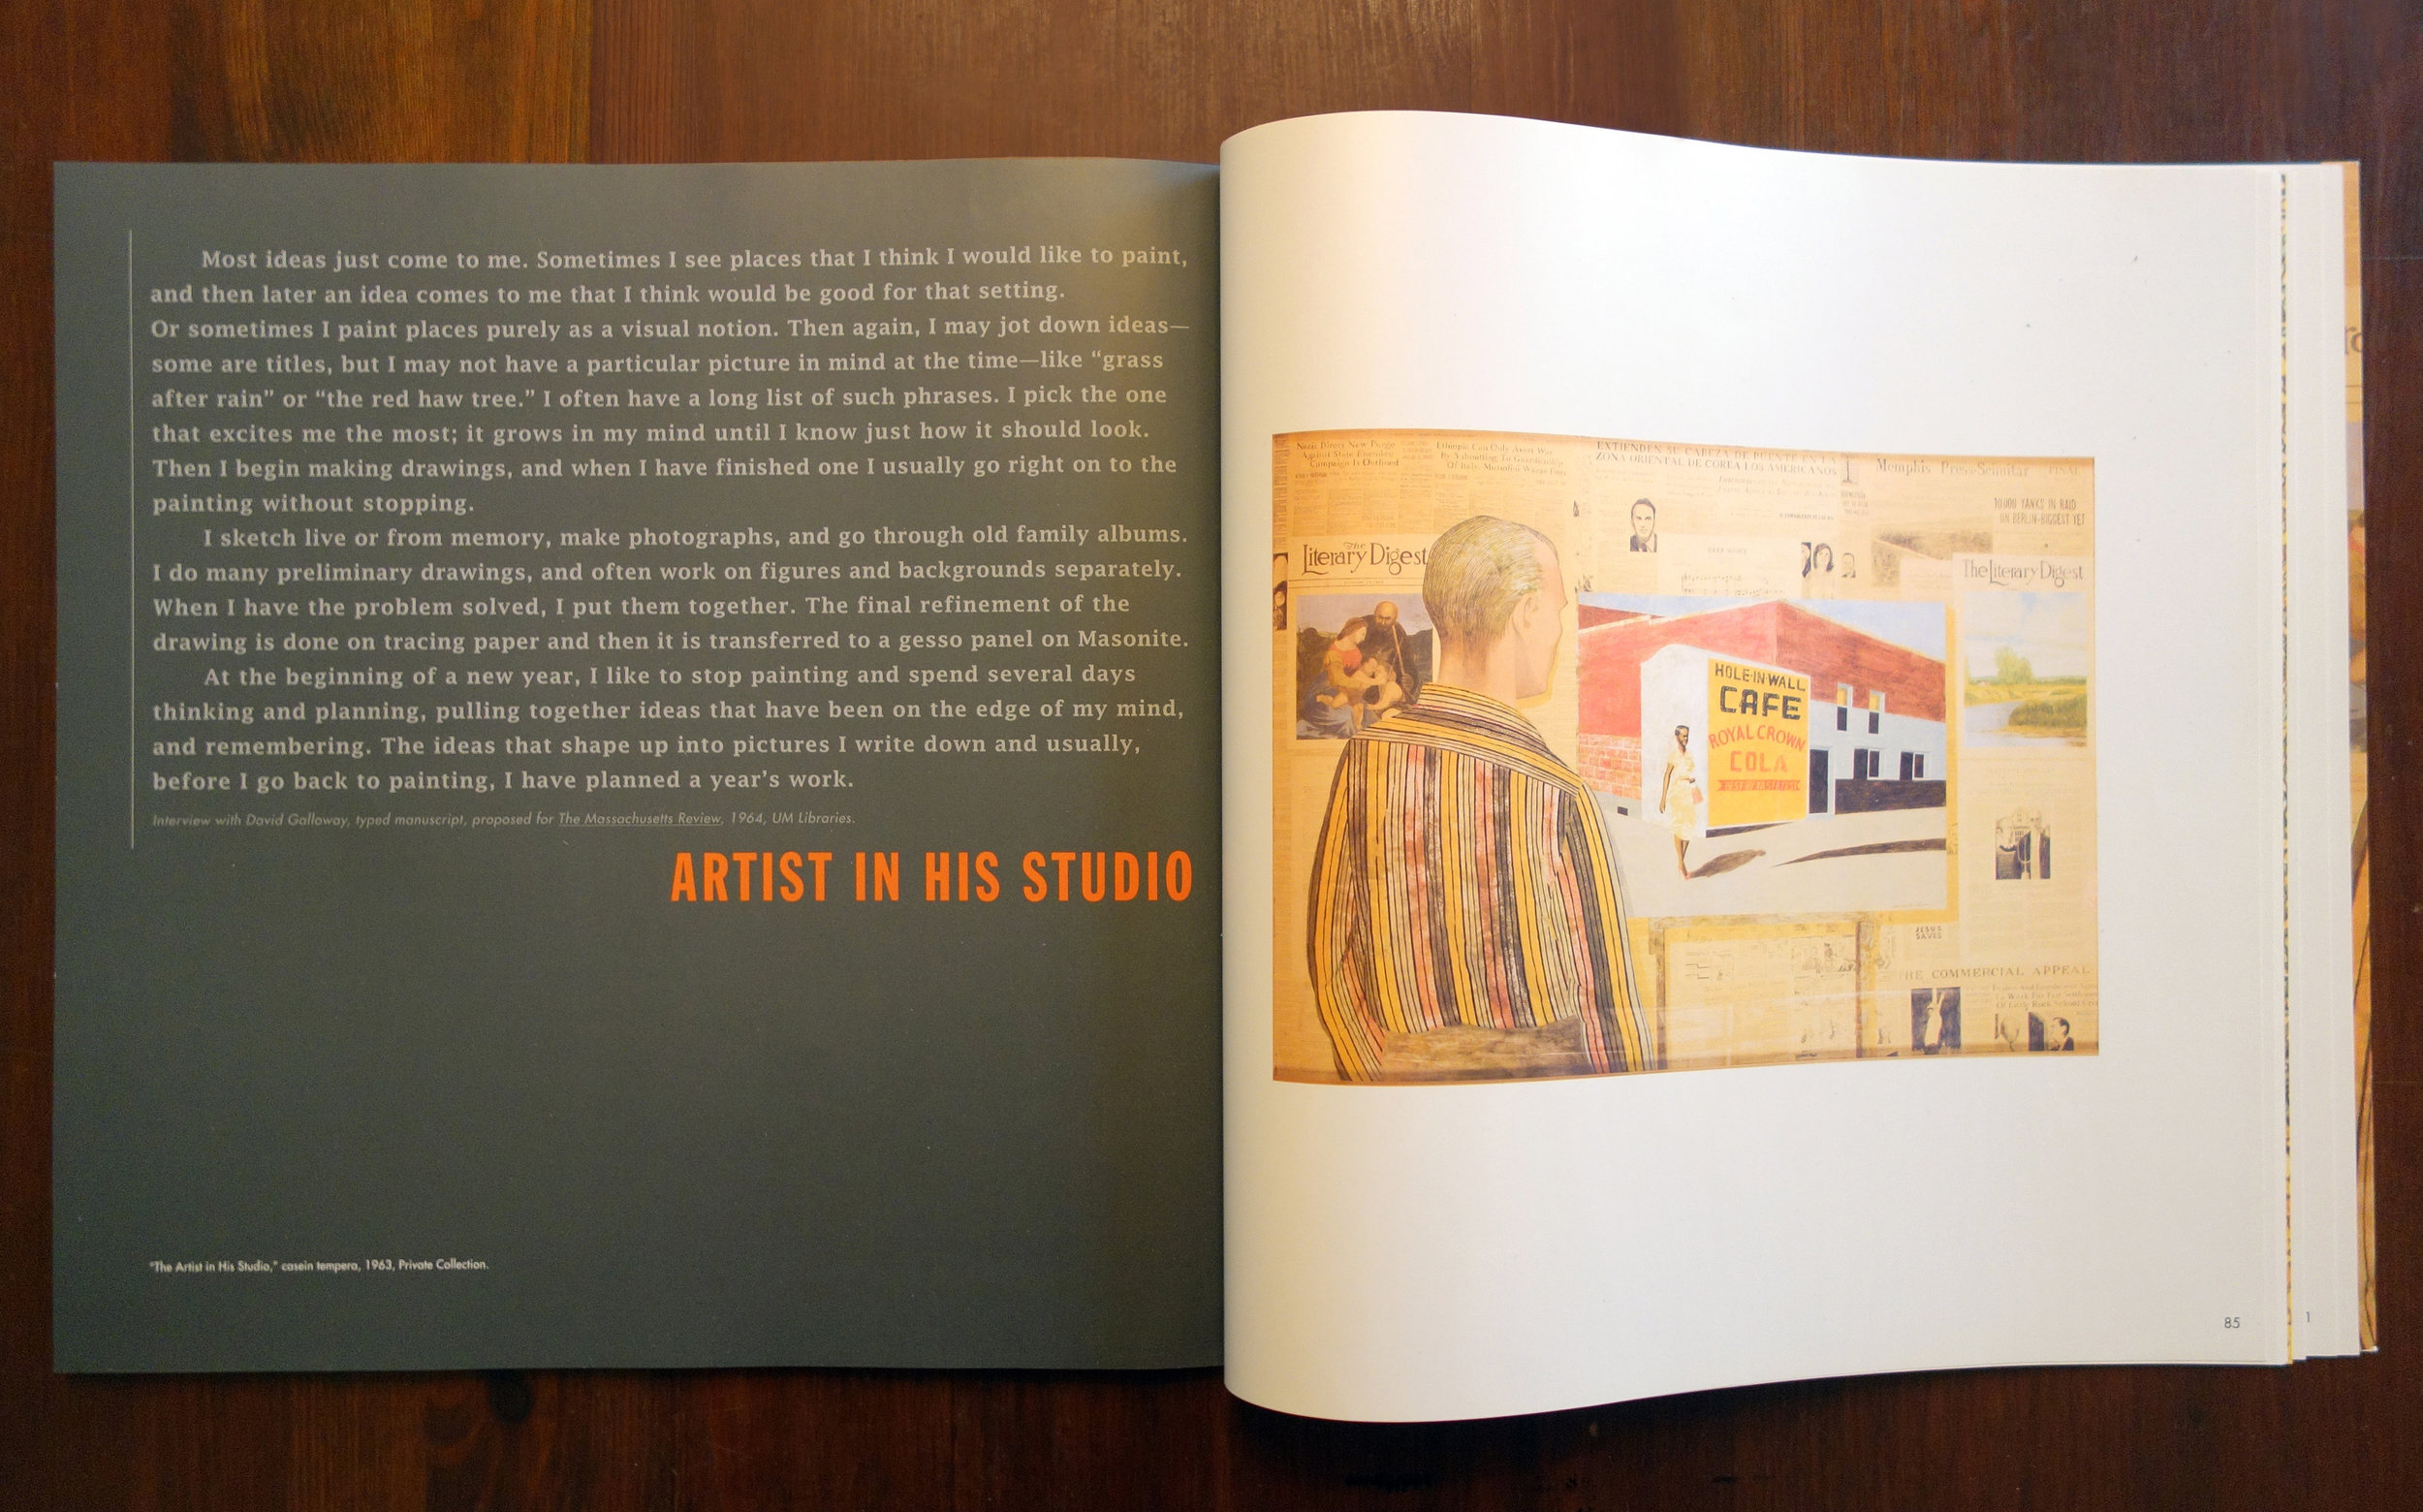  Carroll Cloar in His Studio exhibition catalog  Section spread  Creative direction and design by Chuck Mitchell  Published by University Press of Mississippi and AMUM, Art Museum of the University of Memphis 